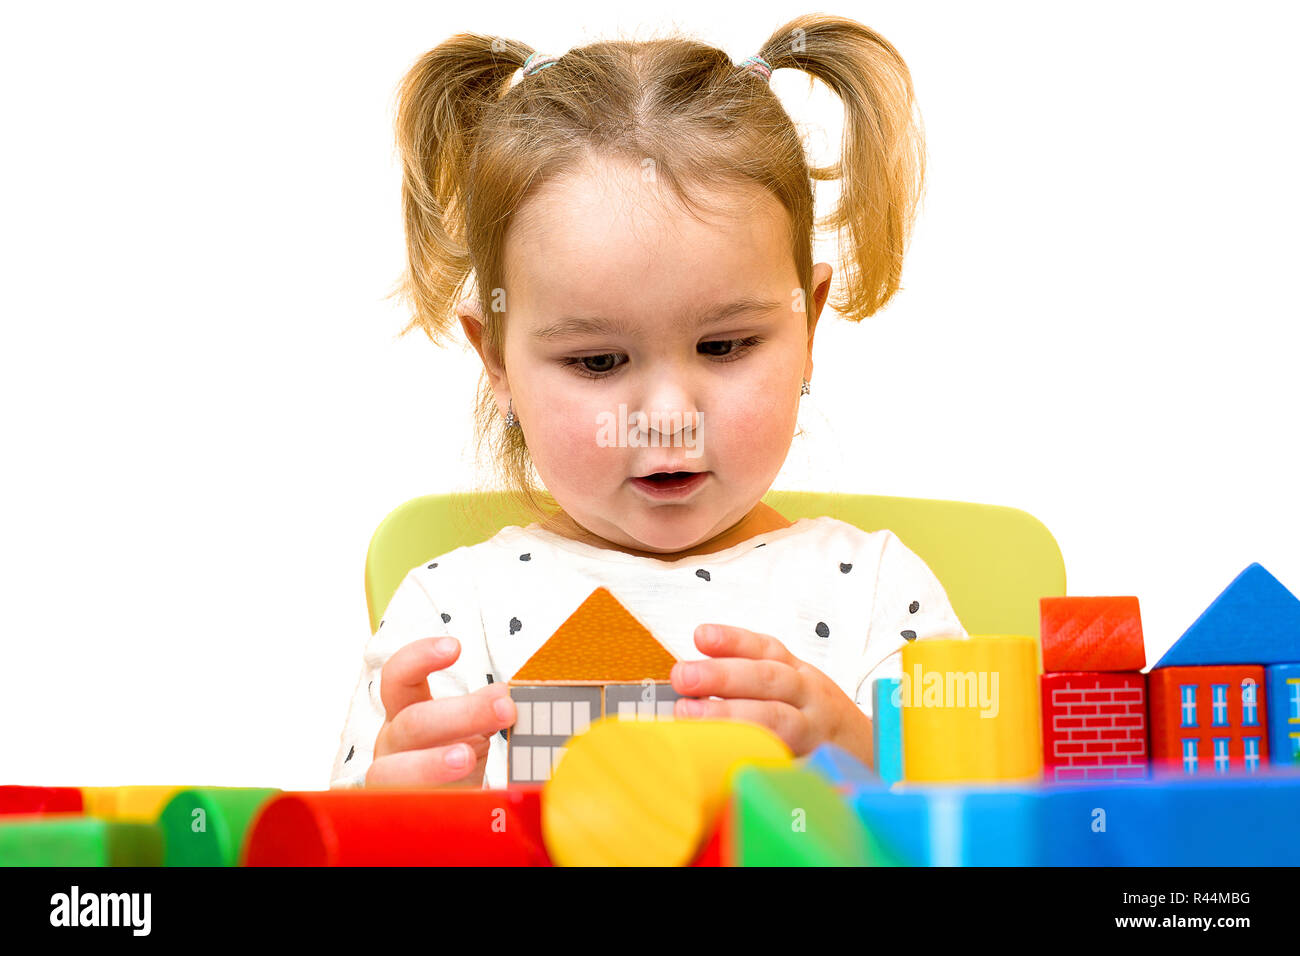 Toddler girl is playing with colorful wooden blocks over white background.  Toddler is building a house out of blocks. Blond hair toddler girl plays wi  Stock Photo - Alamy